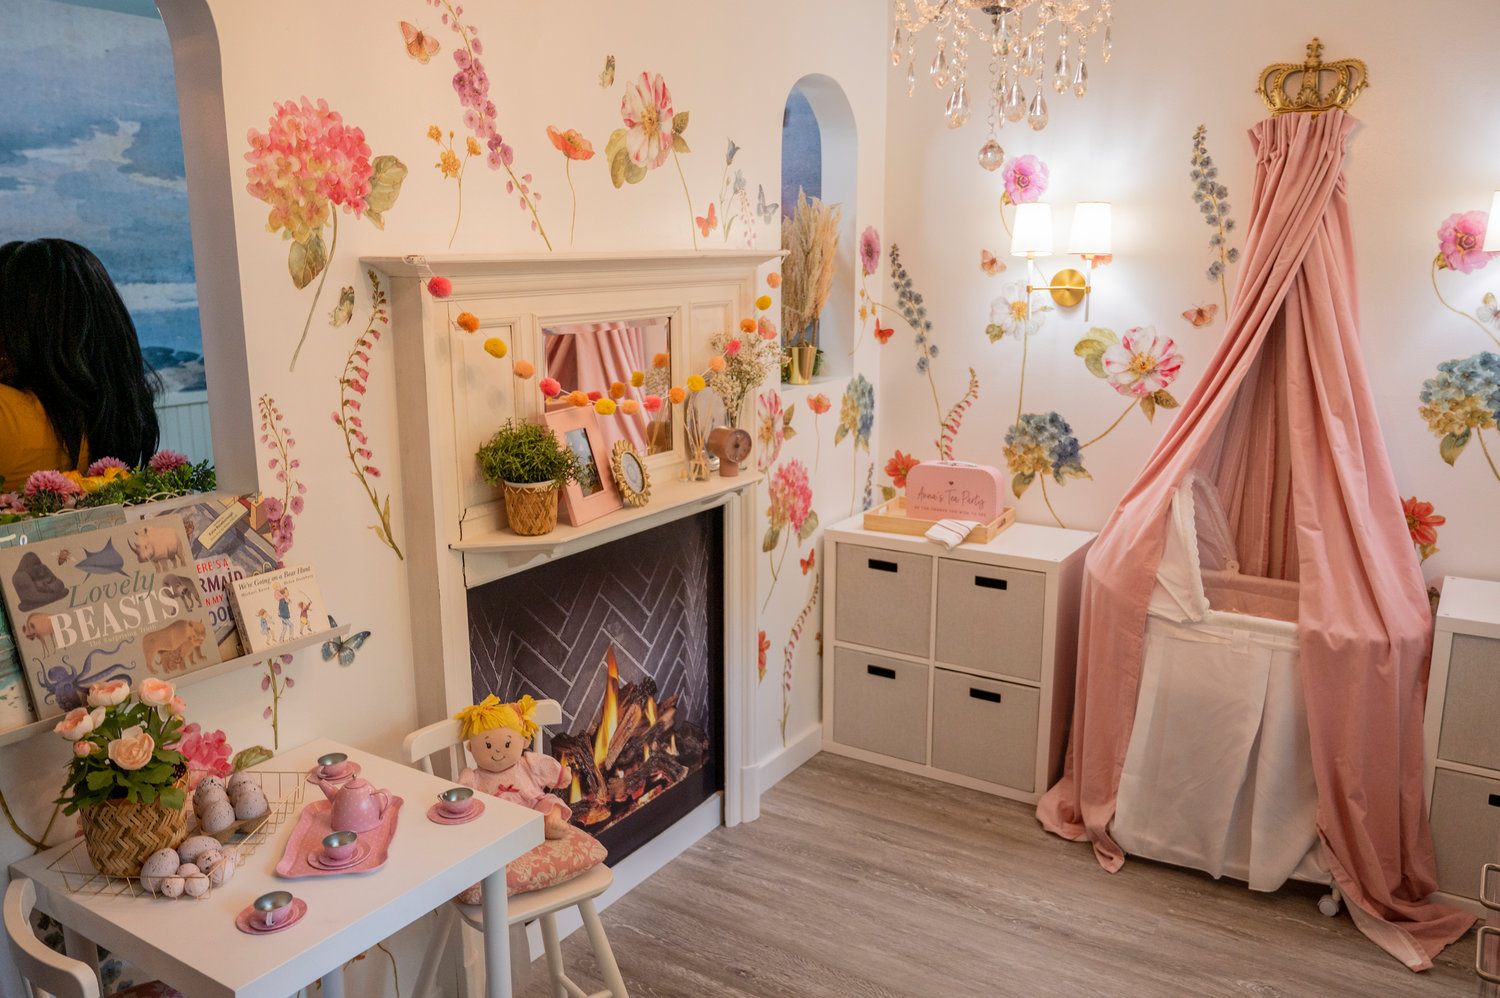 The room, transformed by team from Dreams Come True, is the perfect place for a little girl like Anna.